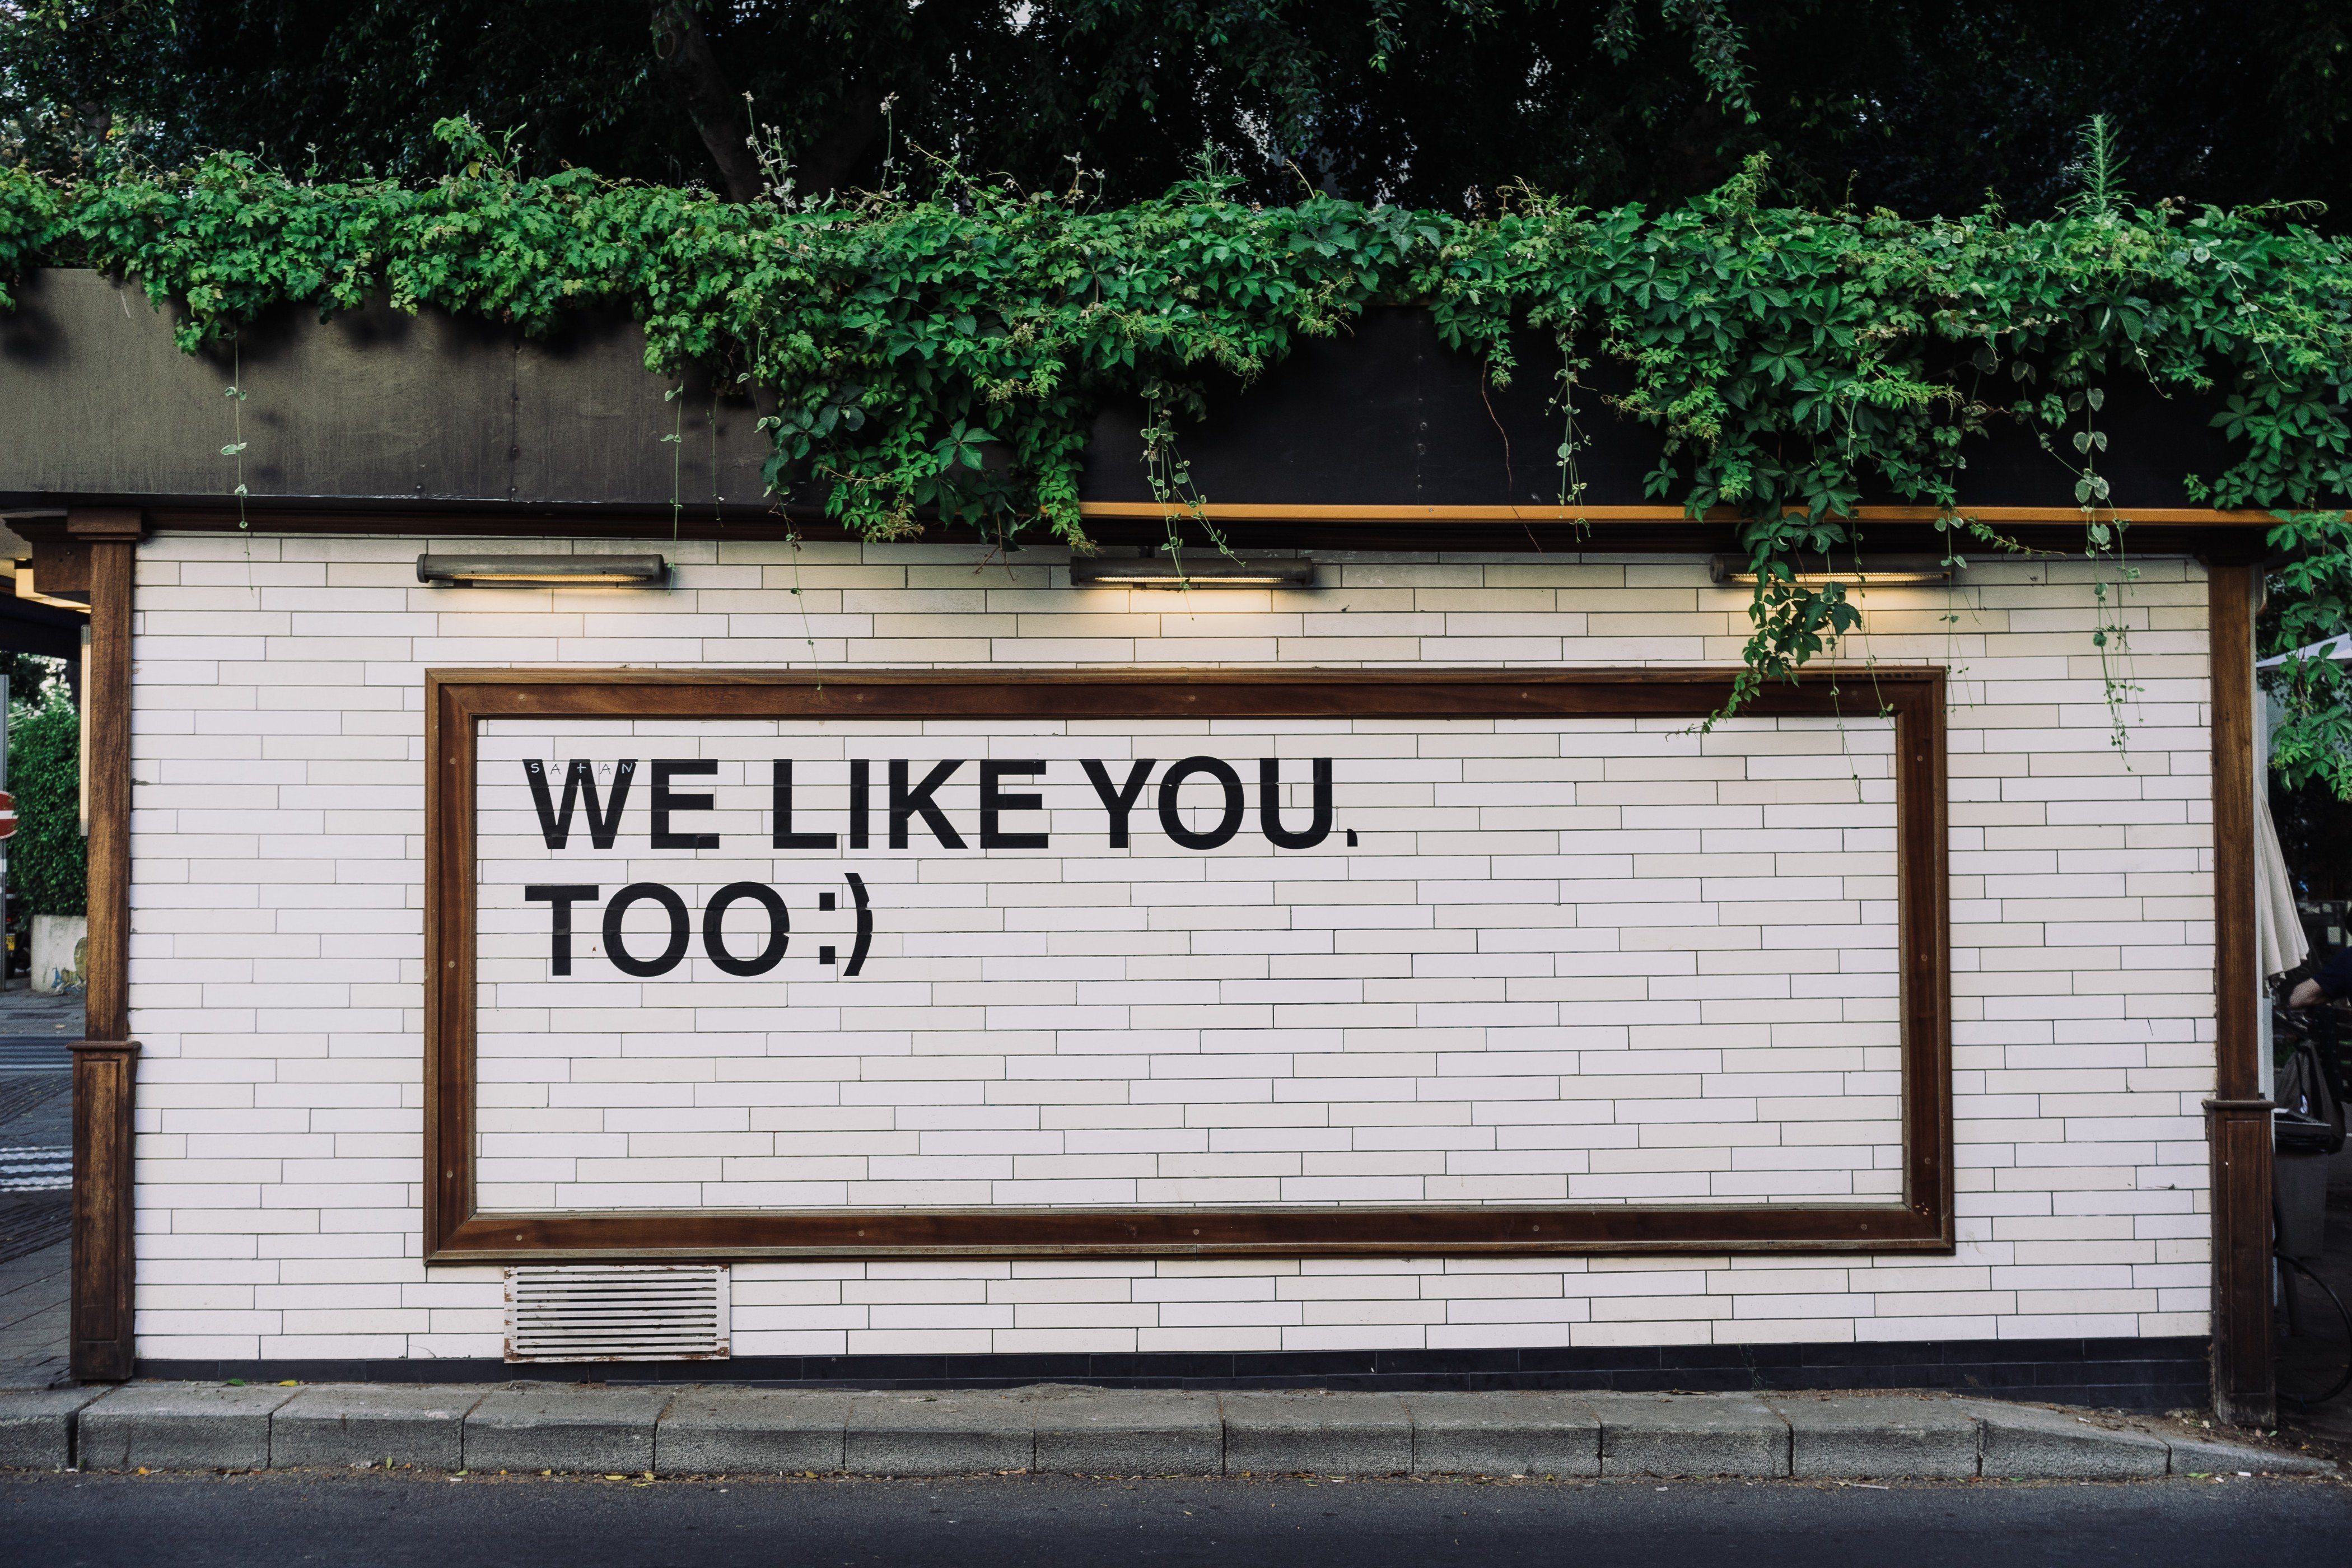 Image showing an outdoor mural that says we like you too :)